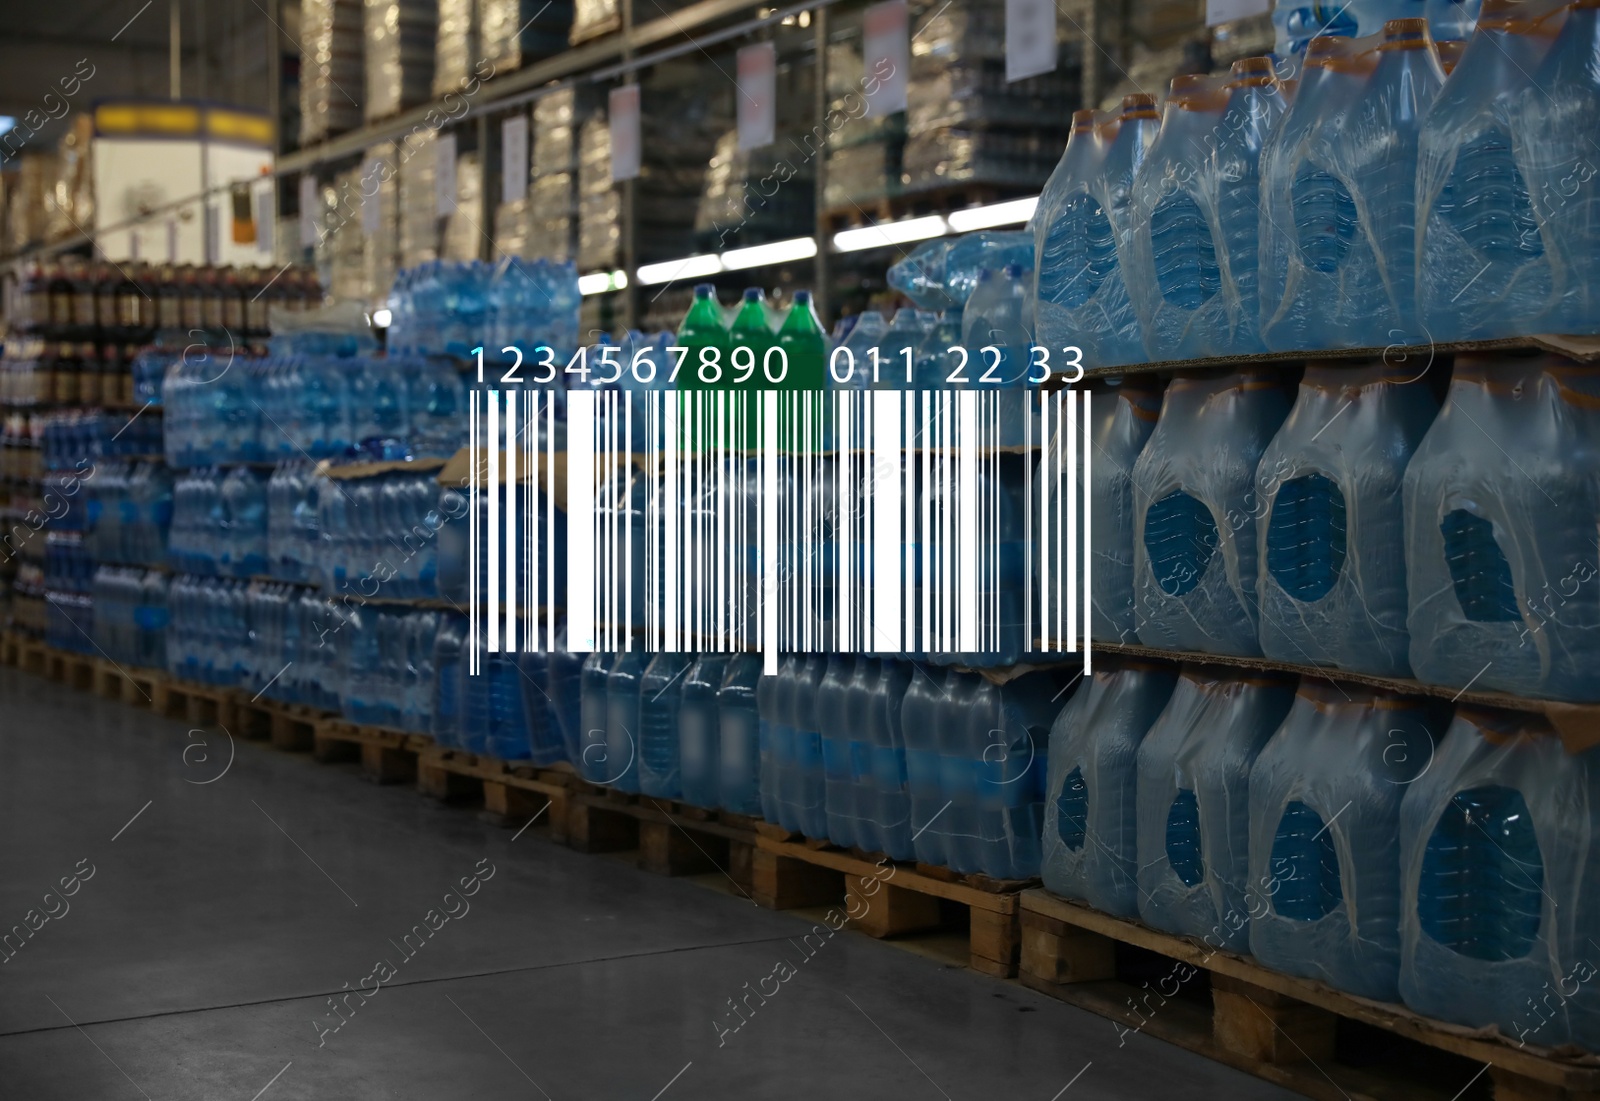 Image of Barcode and many plastic bottles with water at wholesale market